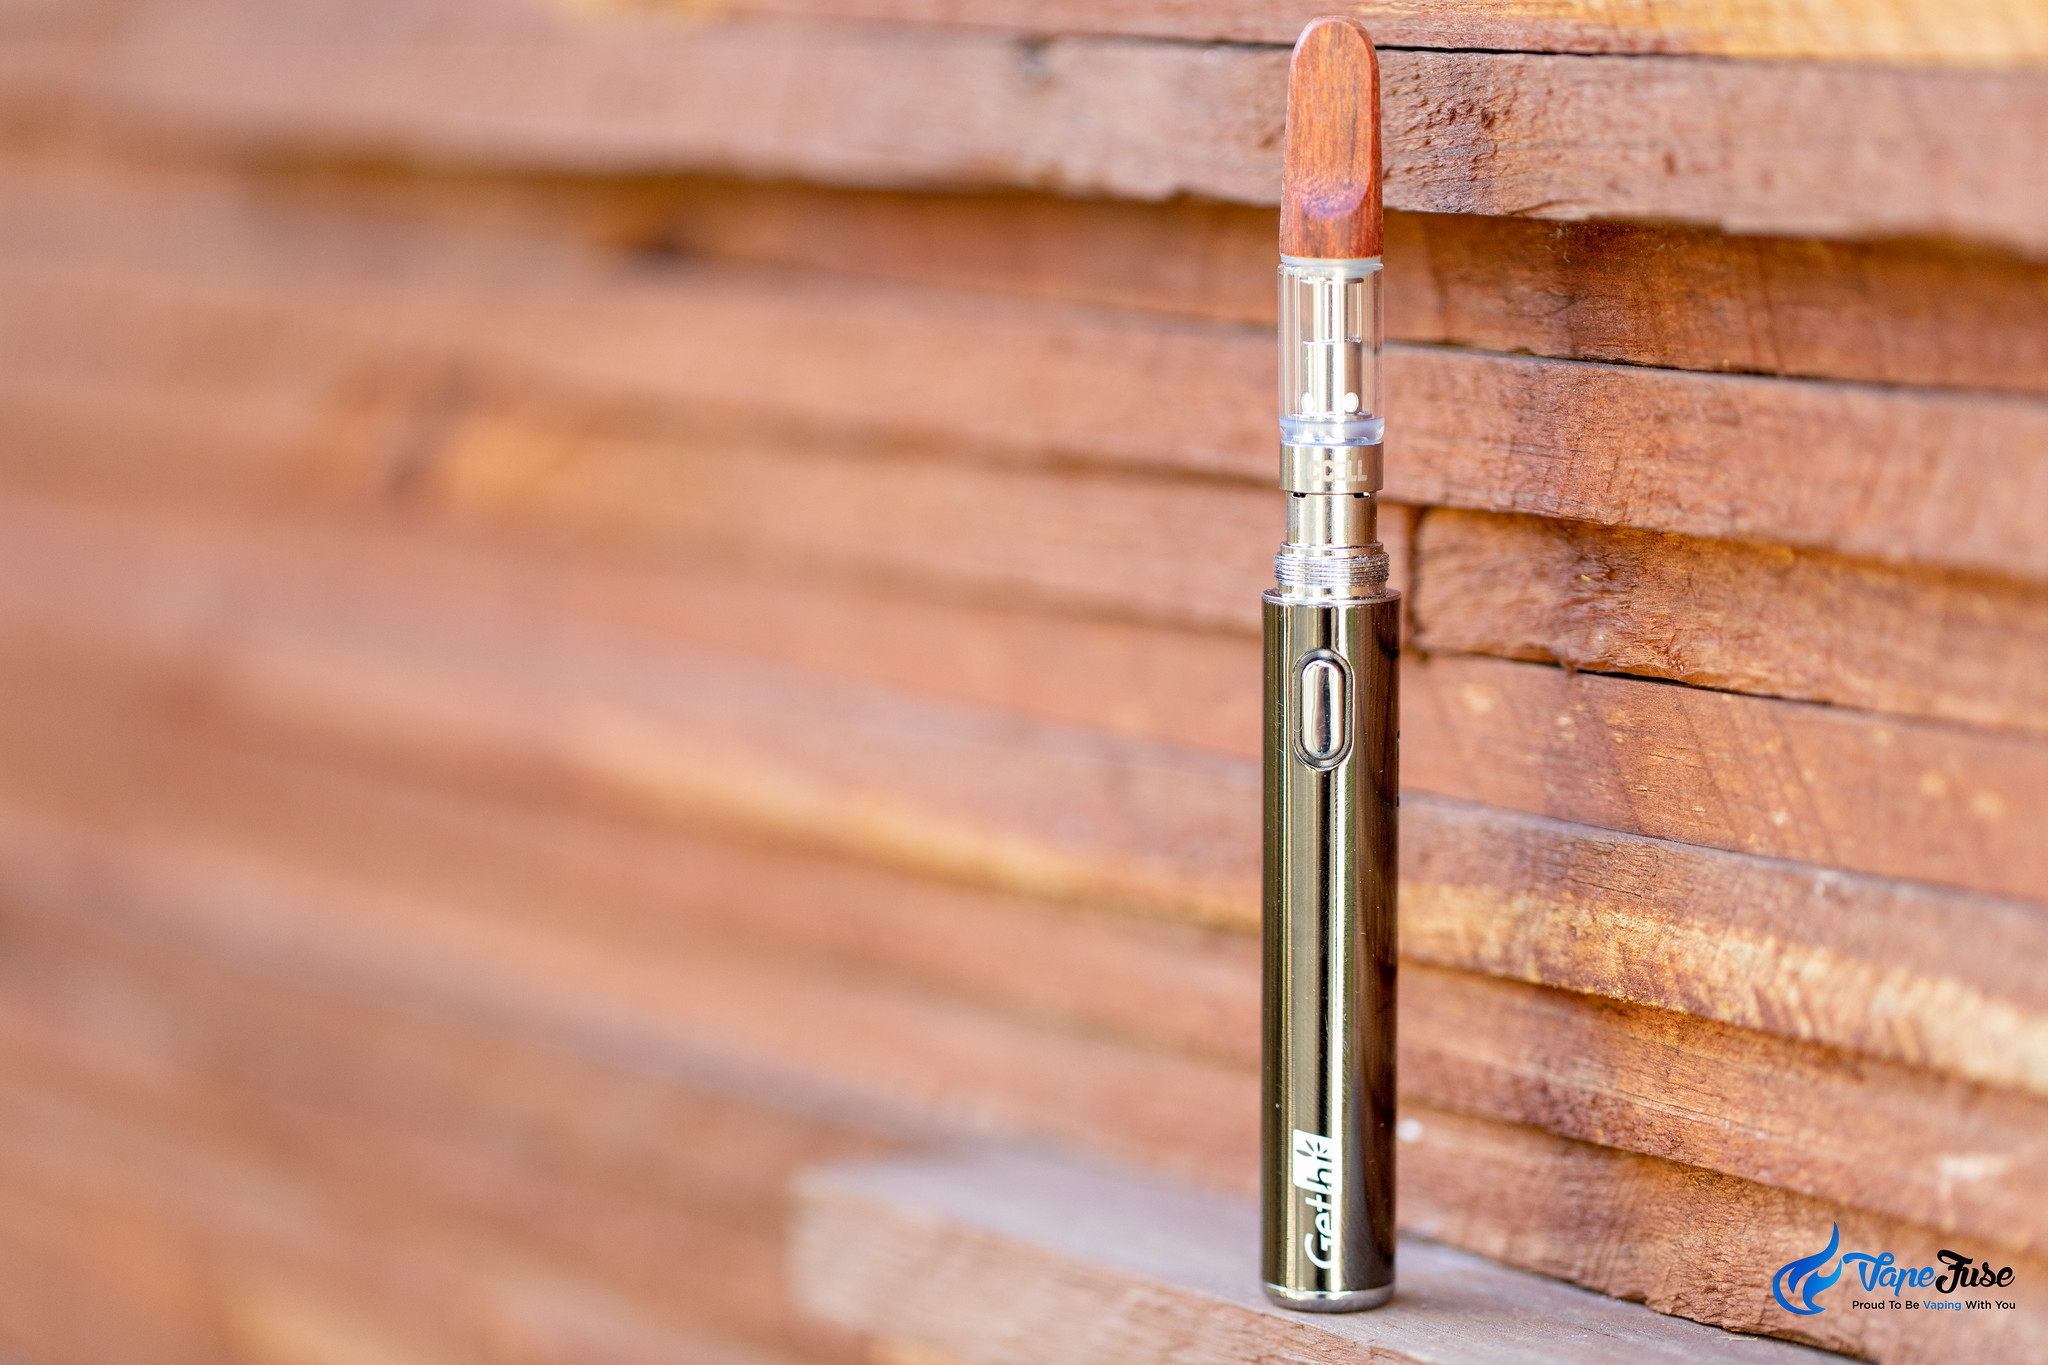 Gethi G5 wax pen with CCell TH2 510 threaded oil cartridge